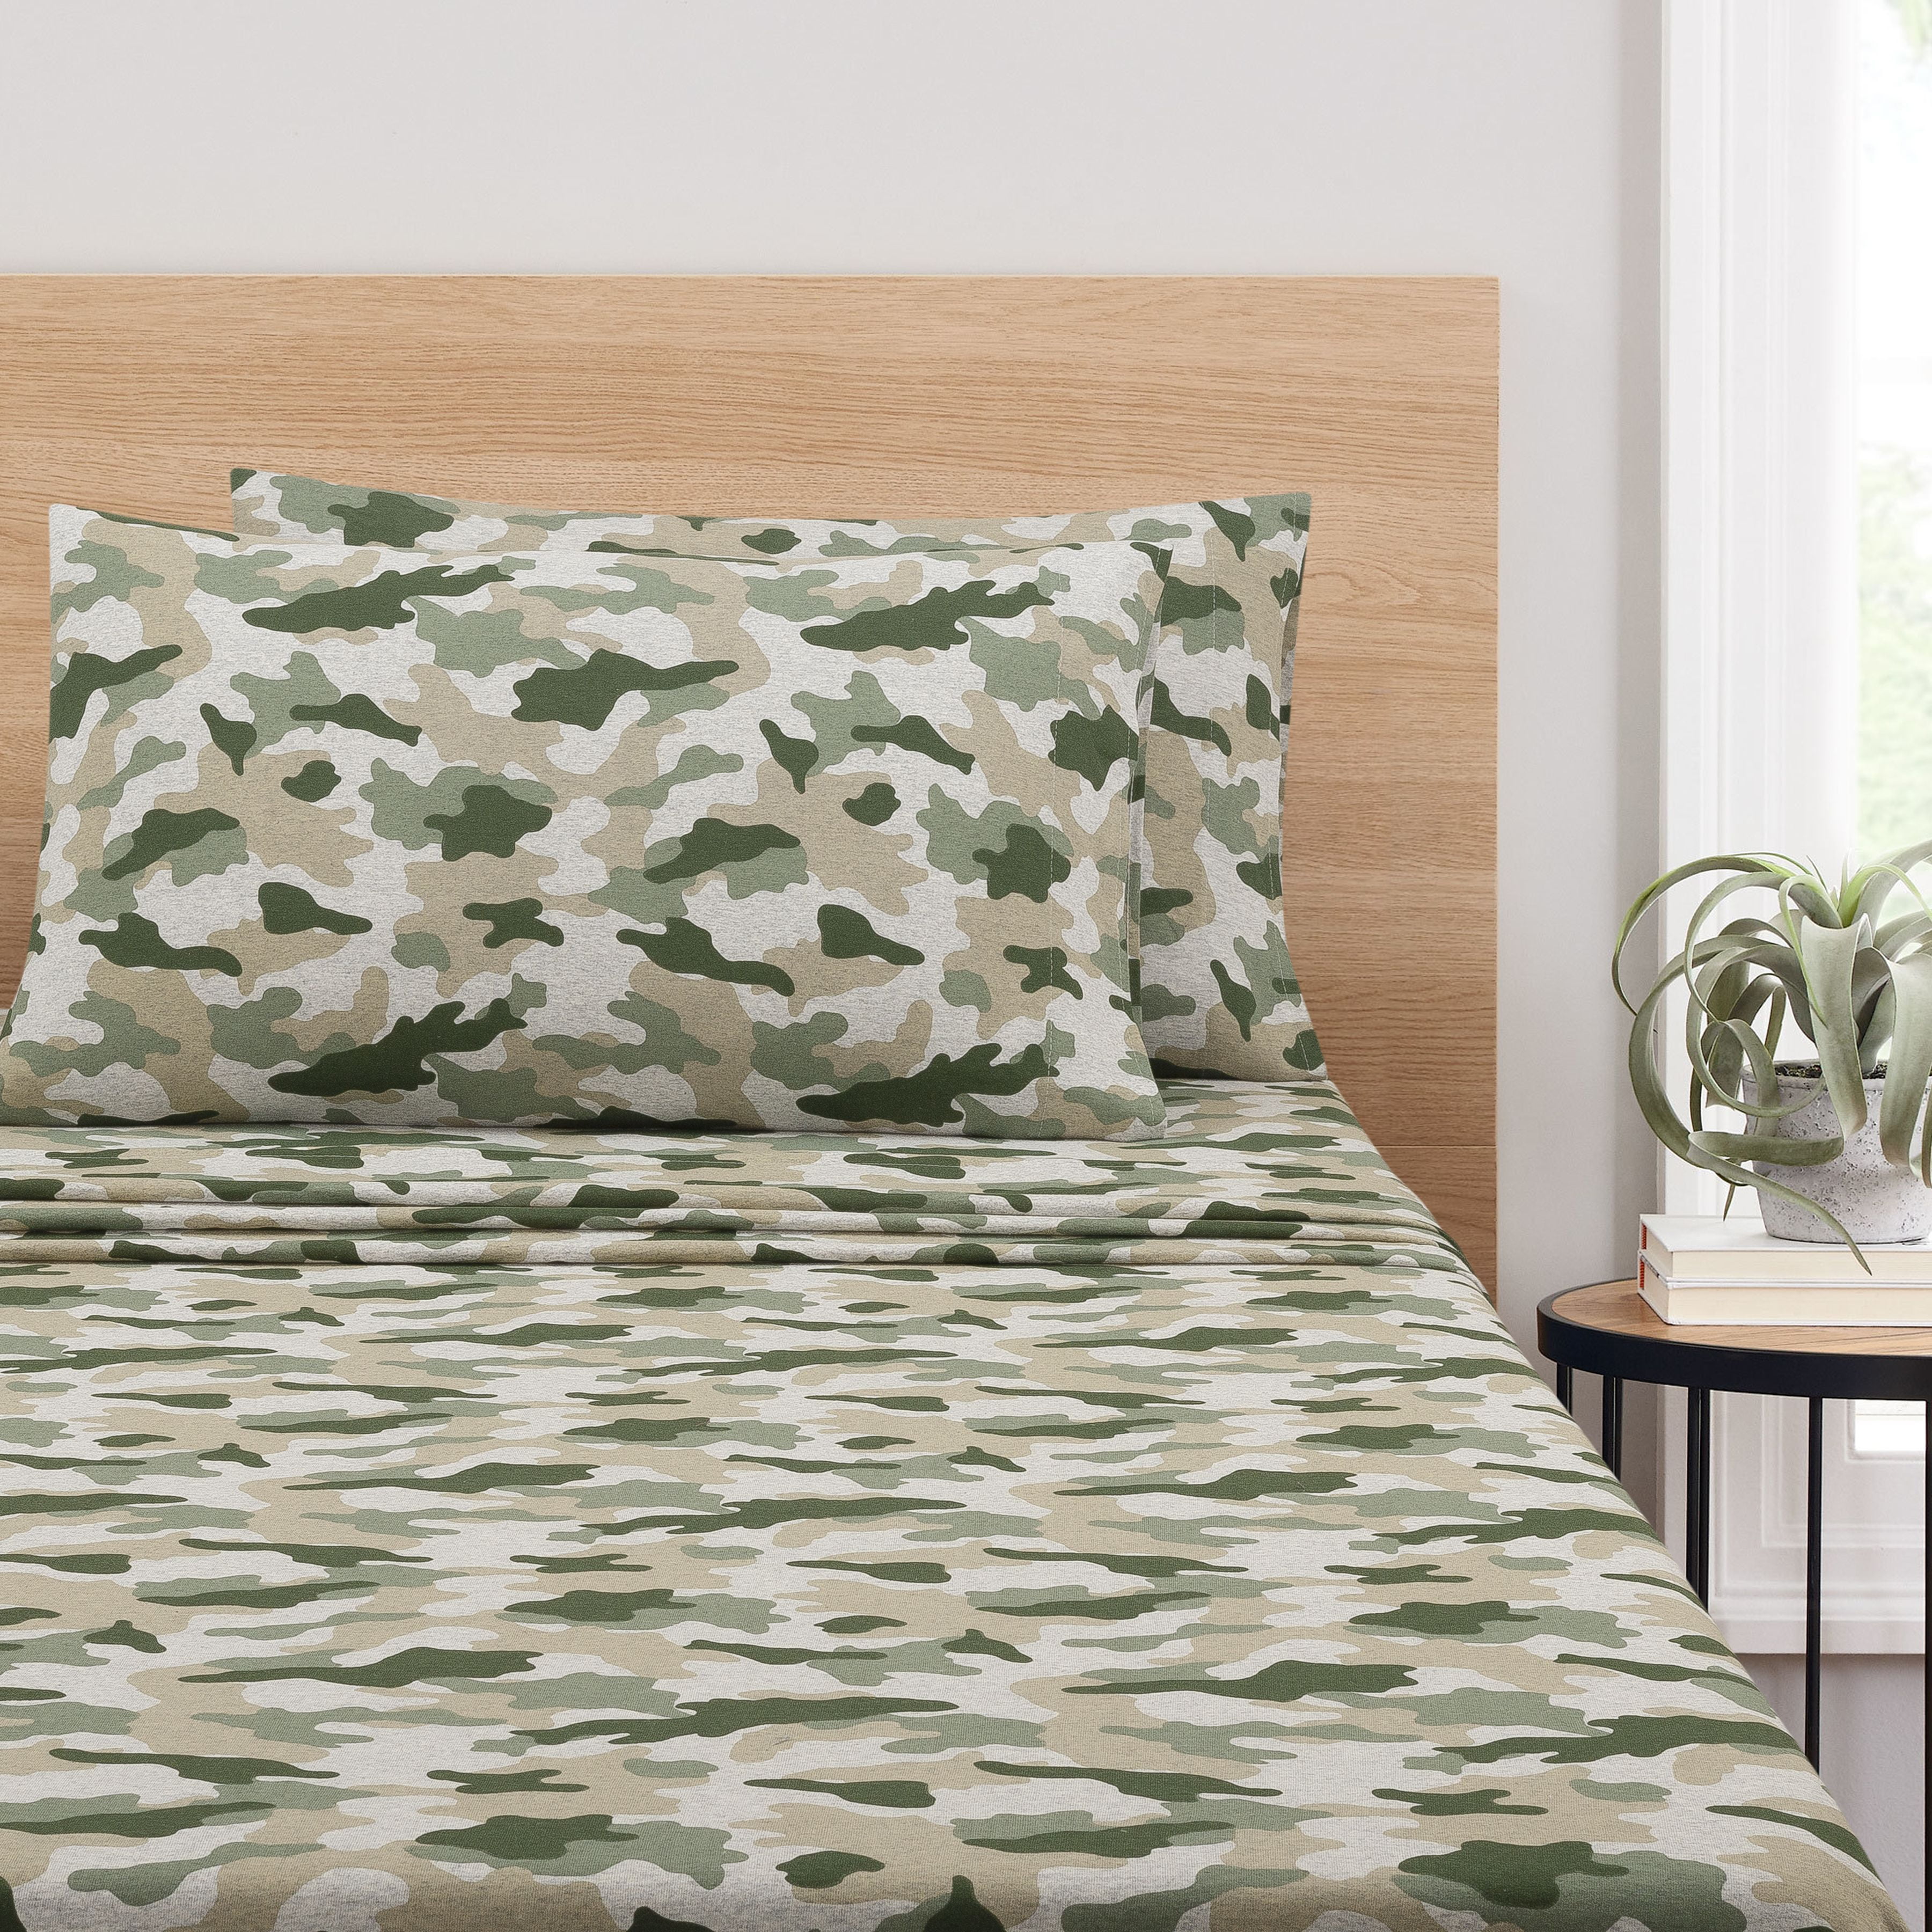 KING COMFORTER 4 CURTAIN SETS!! 27 PC MIXED SIZE! NATURAL CAMO QUEEN SHEETS 